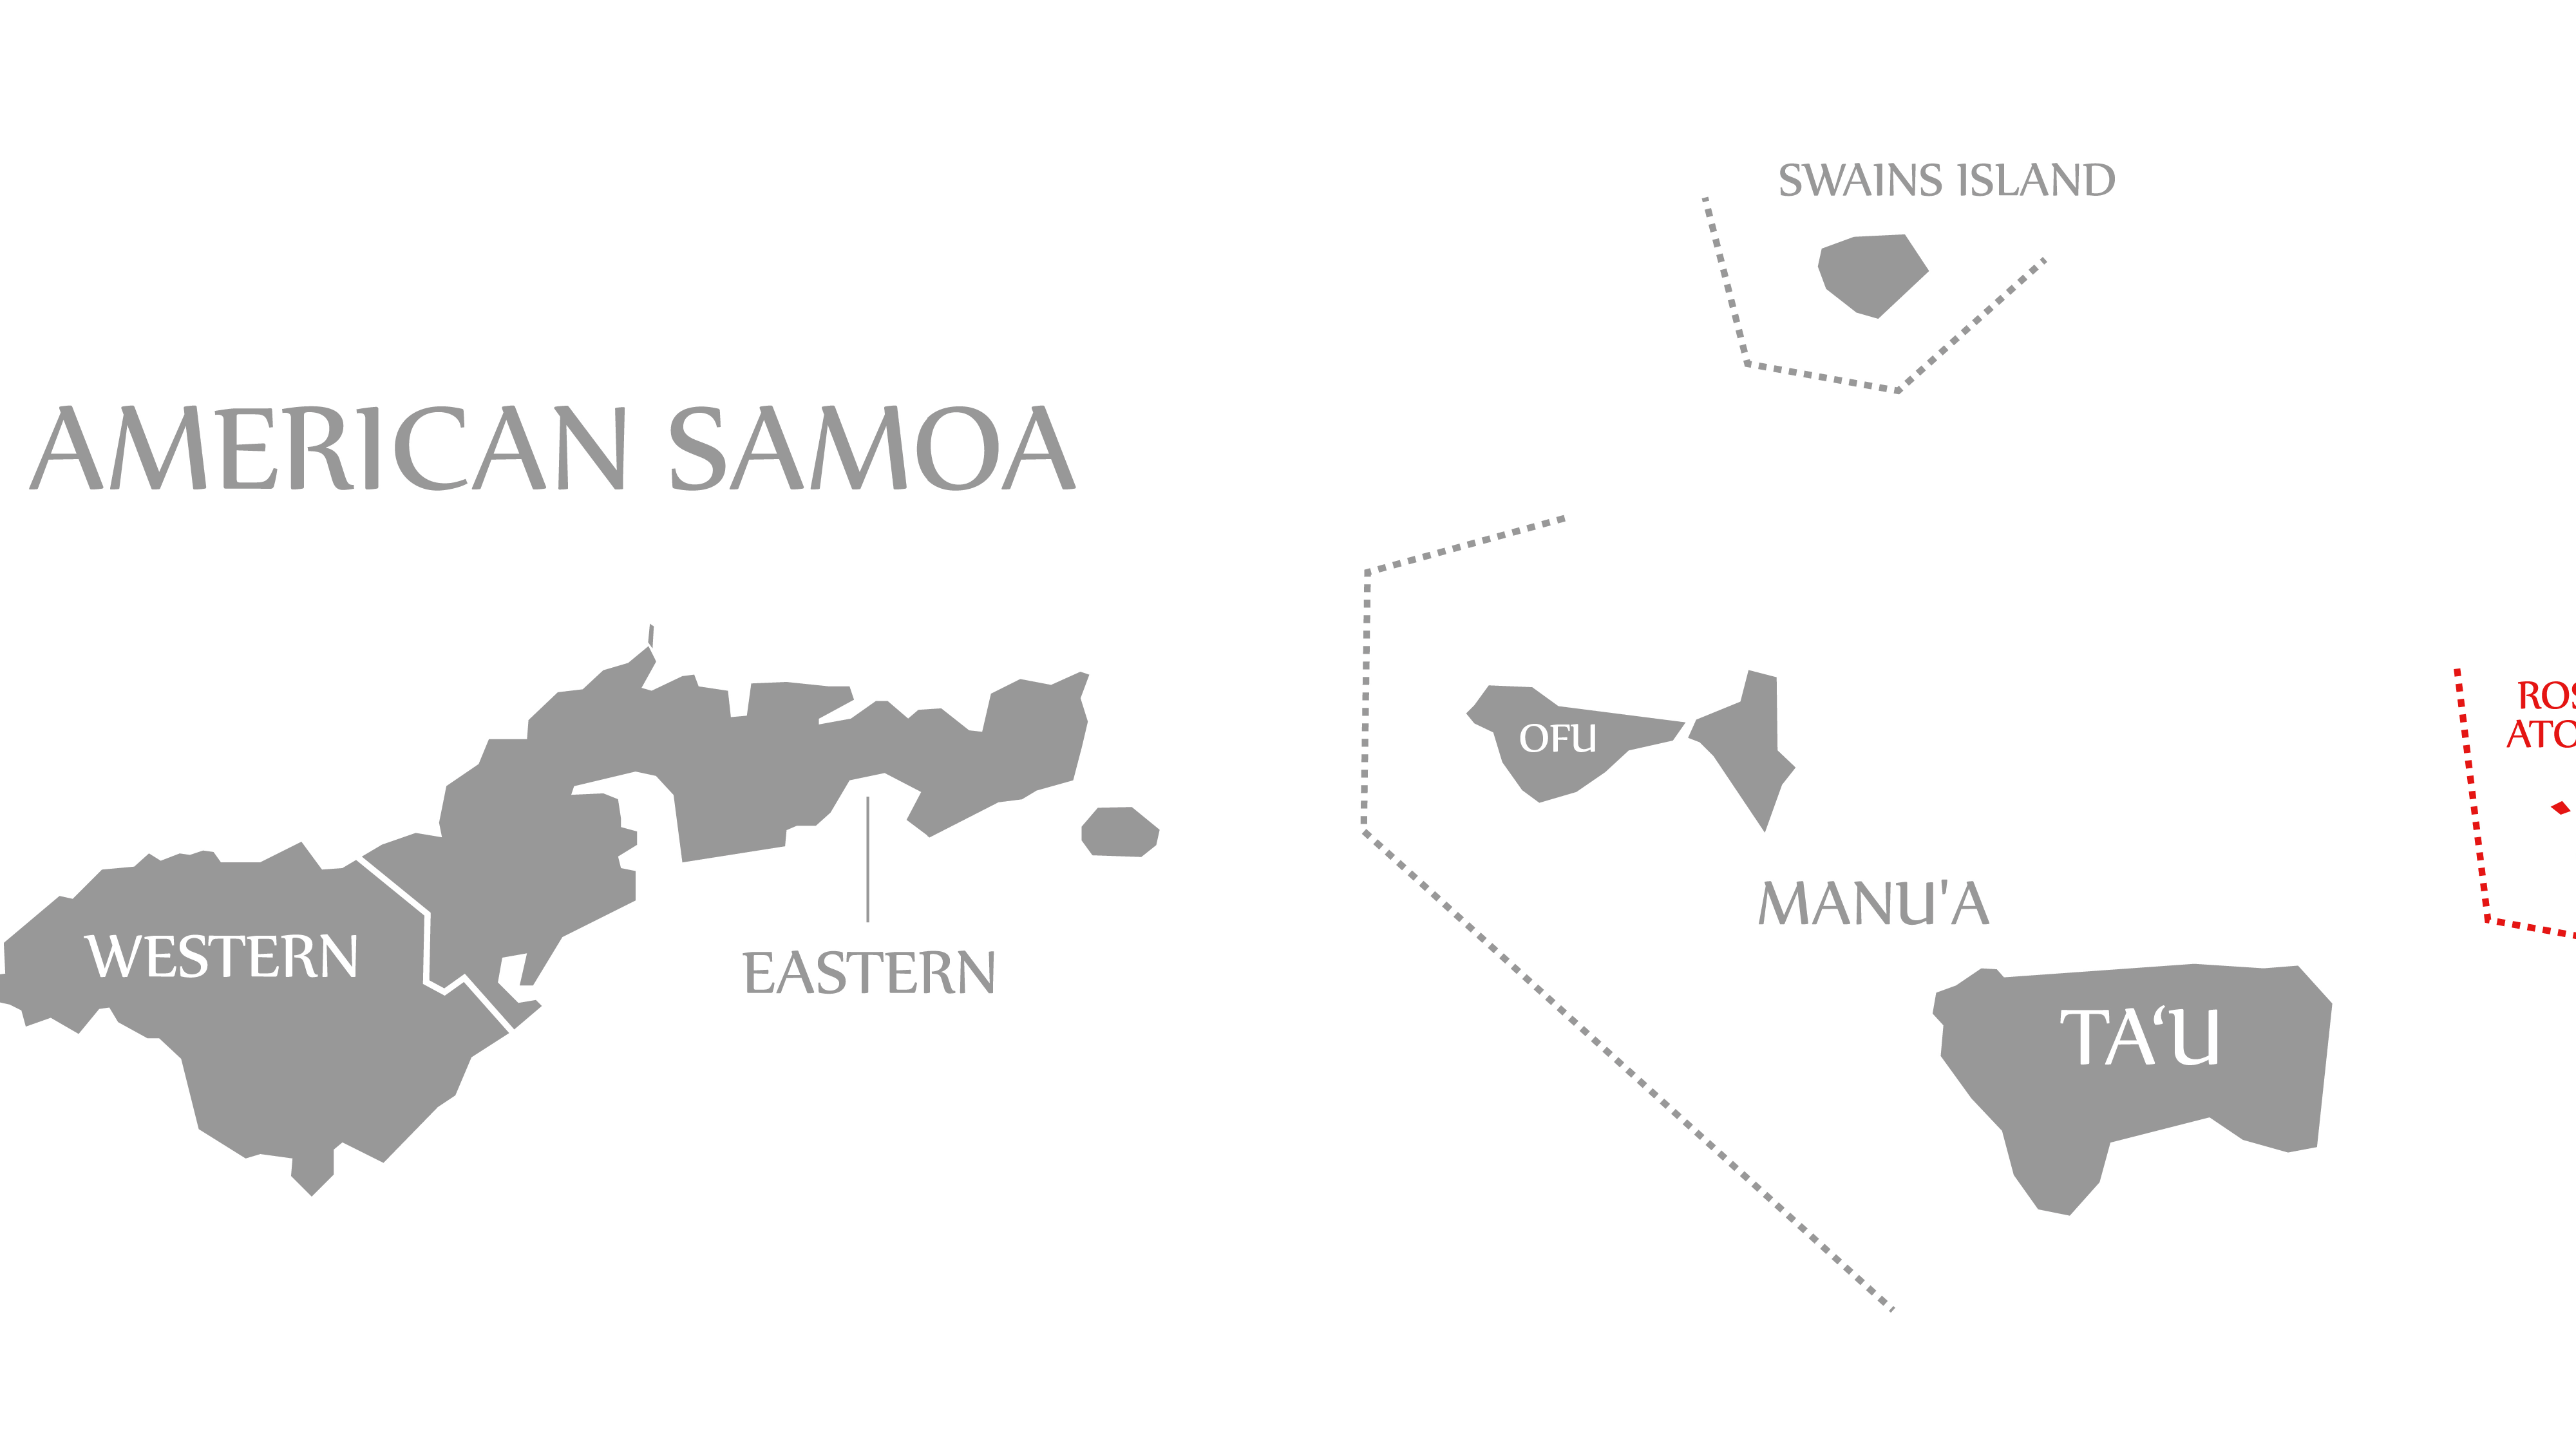 Map of American Samoa: Islands in the South Pacific Ocean